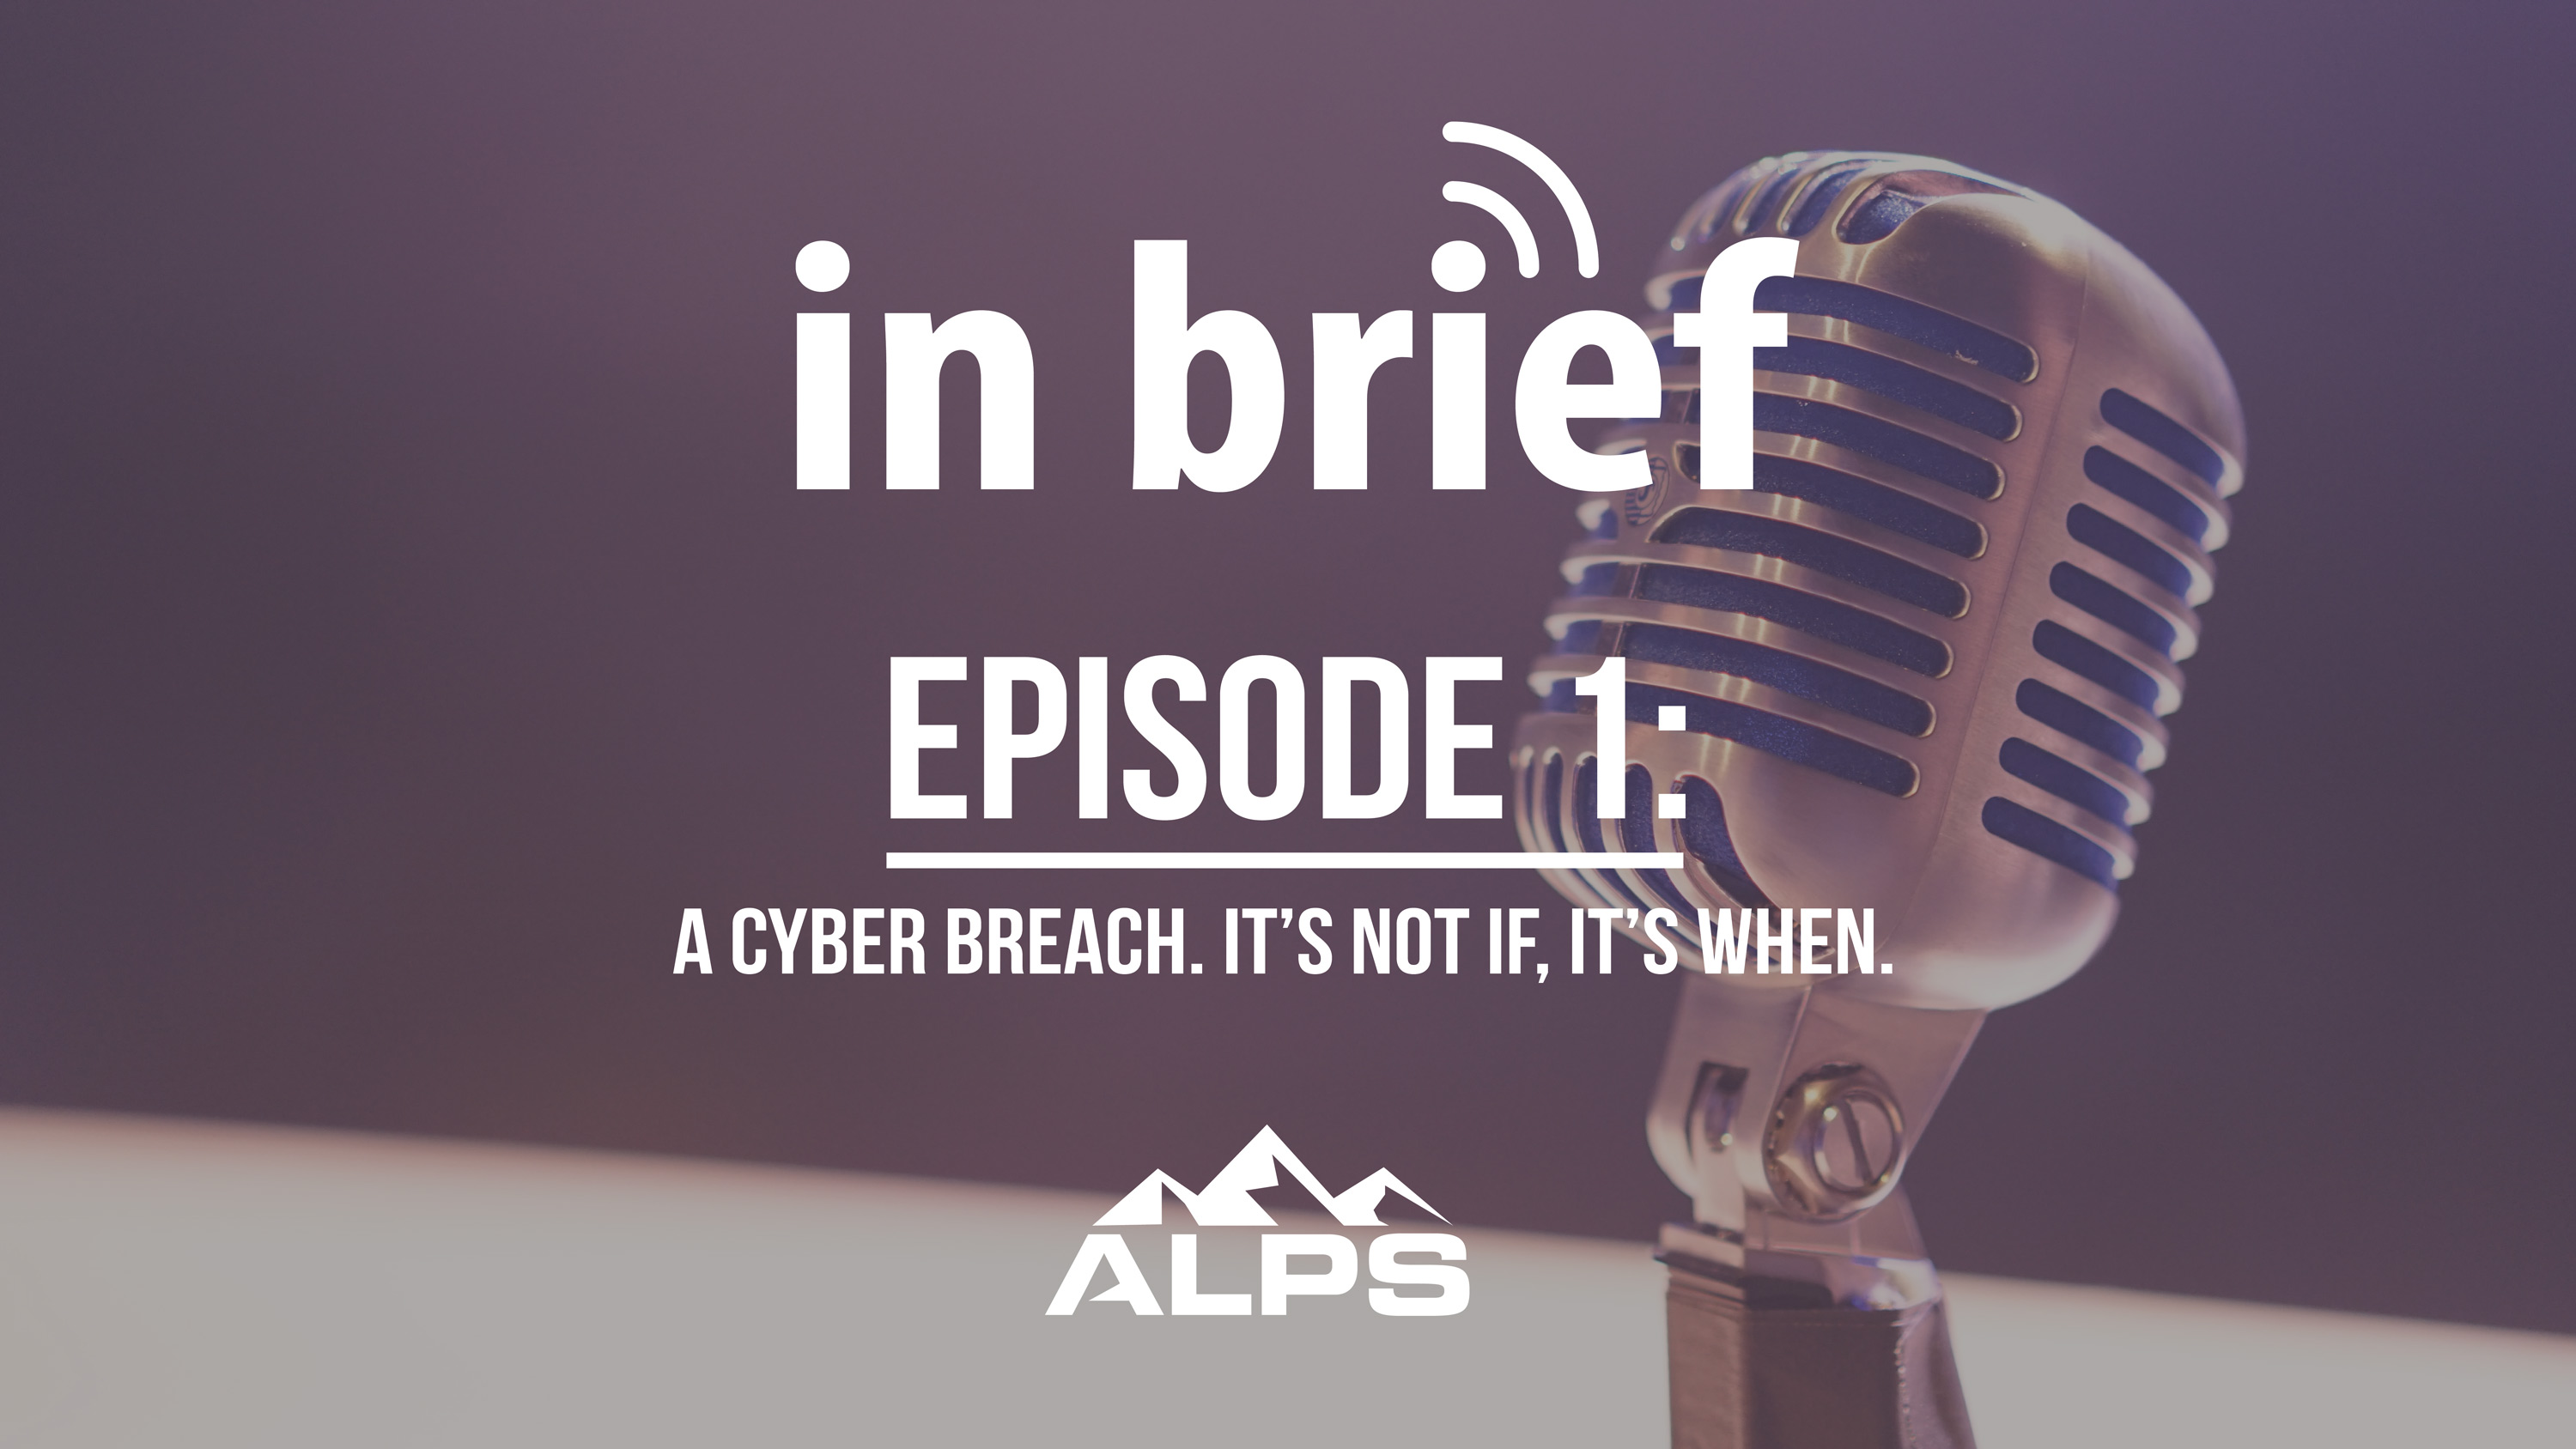 ALPS In Brief Podcast-Episode 1: A Cyber Breach - It’s Not If, It’s When.